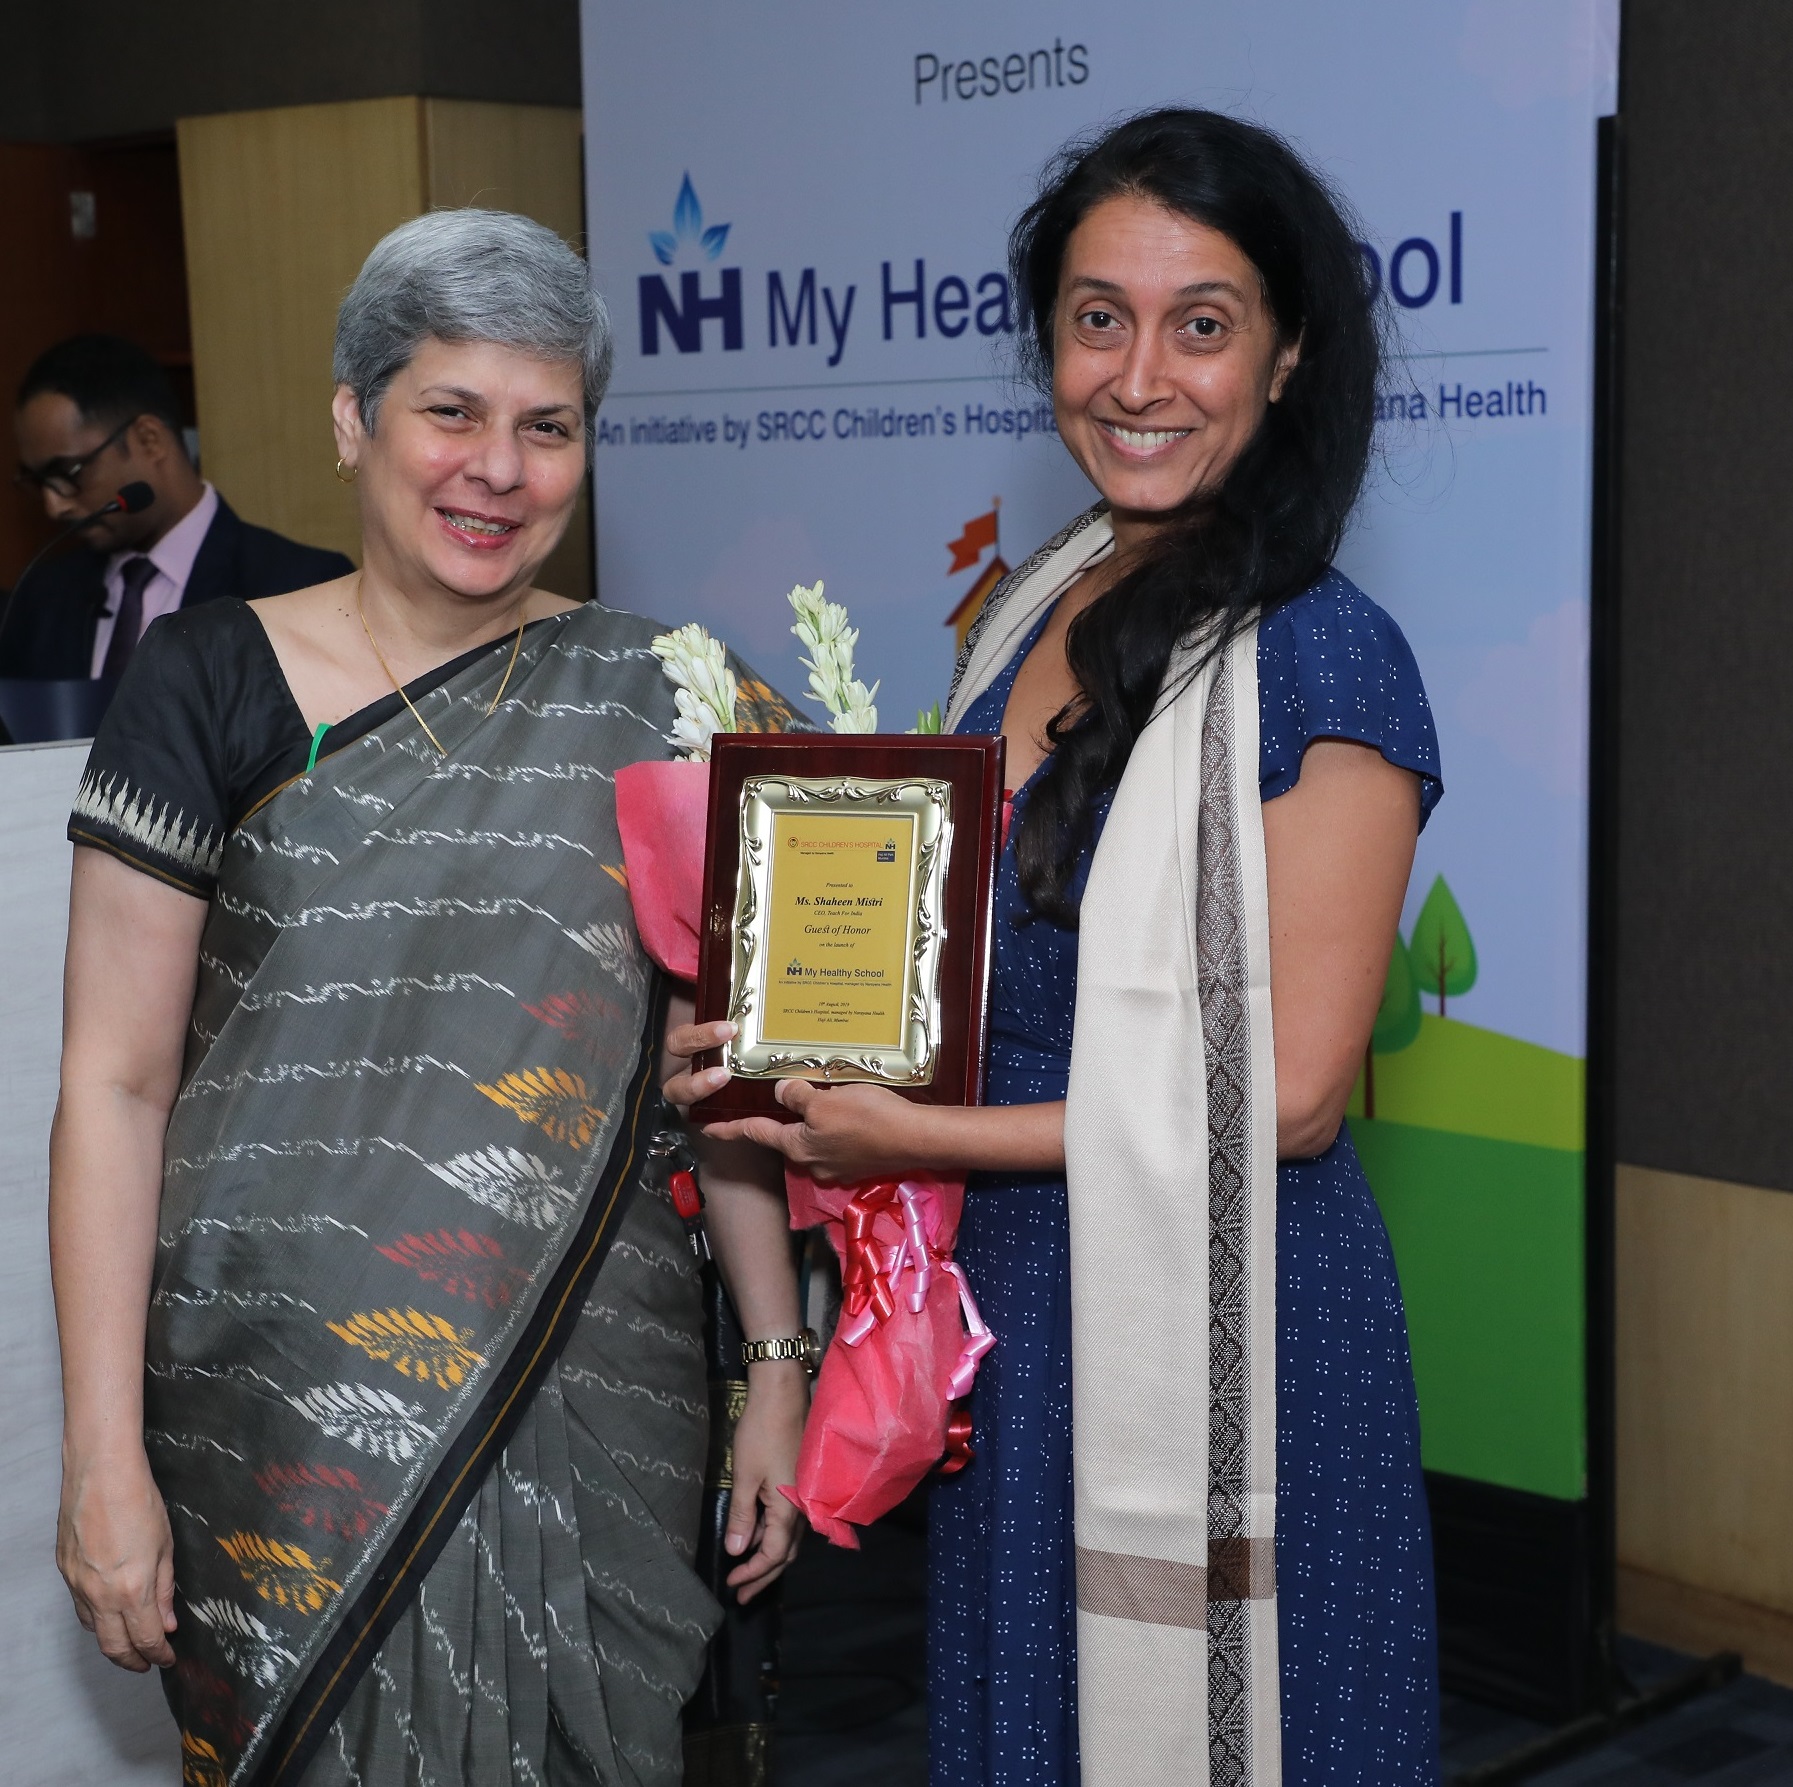 Ms Shaheen Mistri, CEO, Teach For India, was the Guest of Honour at the Symposium on Child’s mental health and lifestyle diseases, organised by Narayana Health SRCC Children’s Hospital at Haji Ali, Mumbai today. Ms Shaheen Mistri was felicitated by Dr Soonu Udani, Medical Director, Narayana Health SRCC Children’s Hospital - Photo By GPN